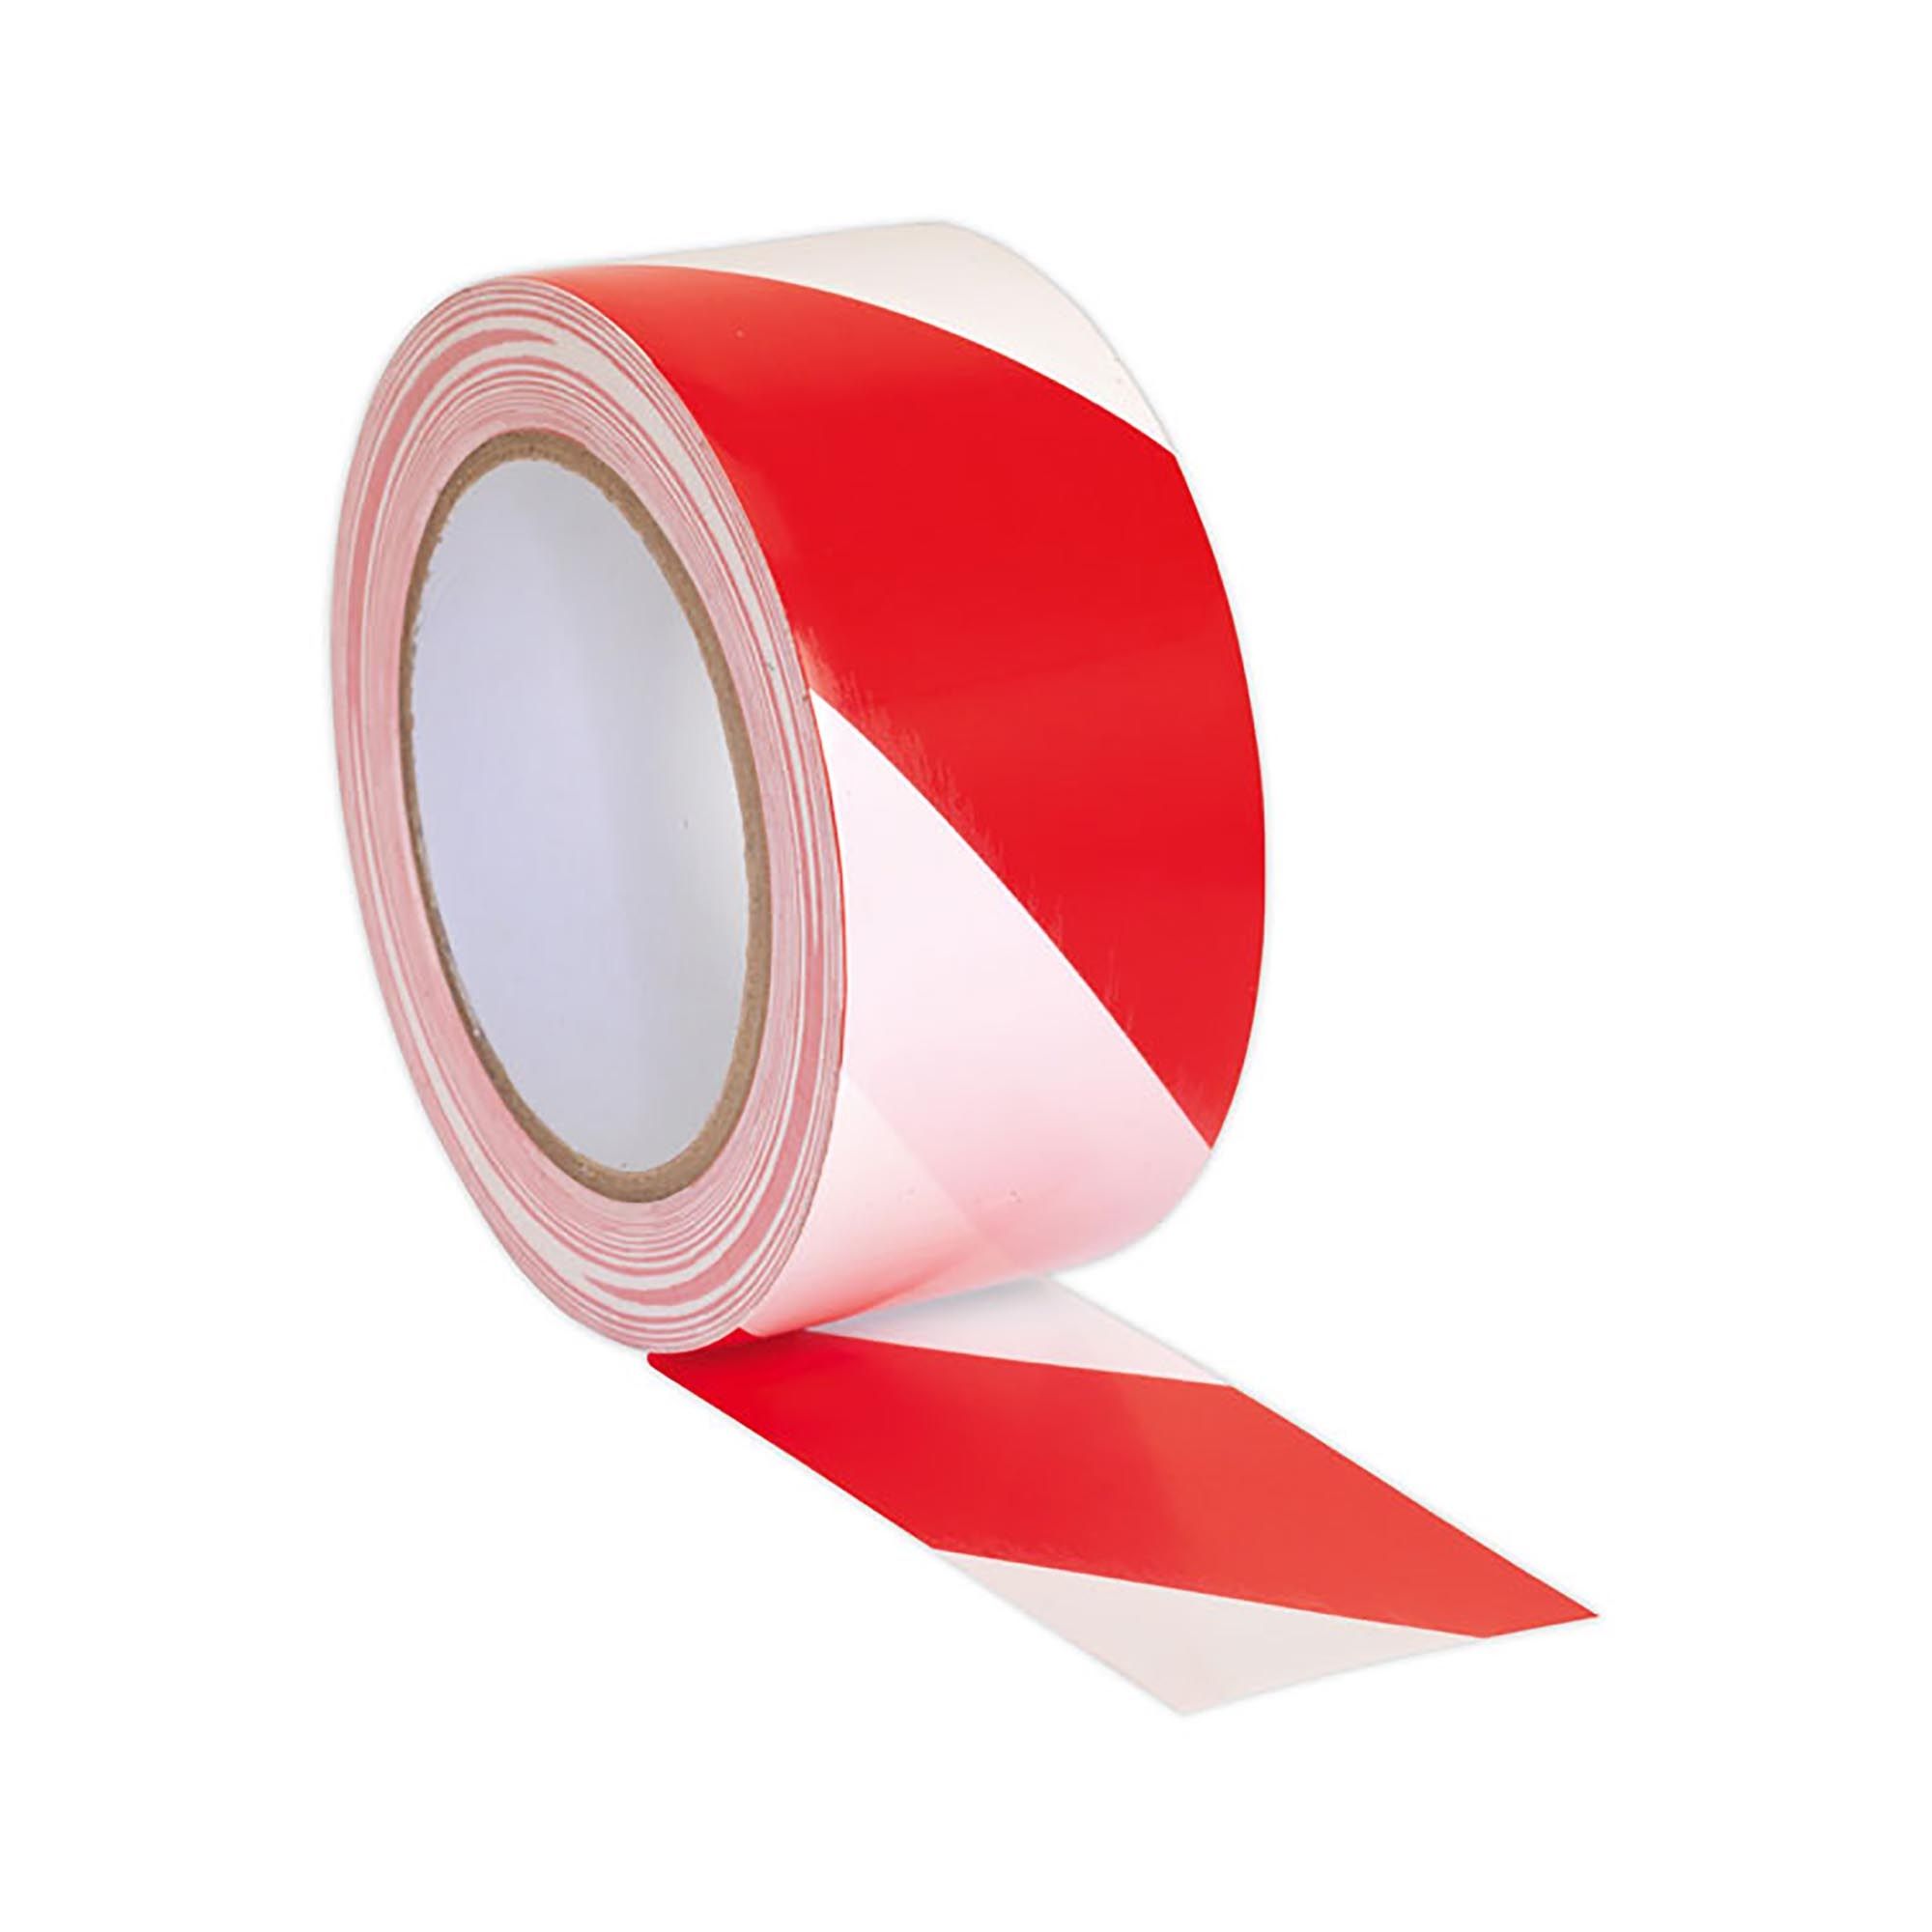 70mm x 500m Hazard Warning Barrier Tape Red and White Non Adhesive 